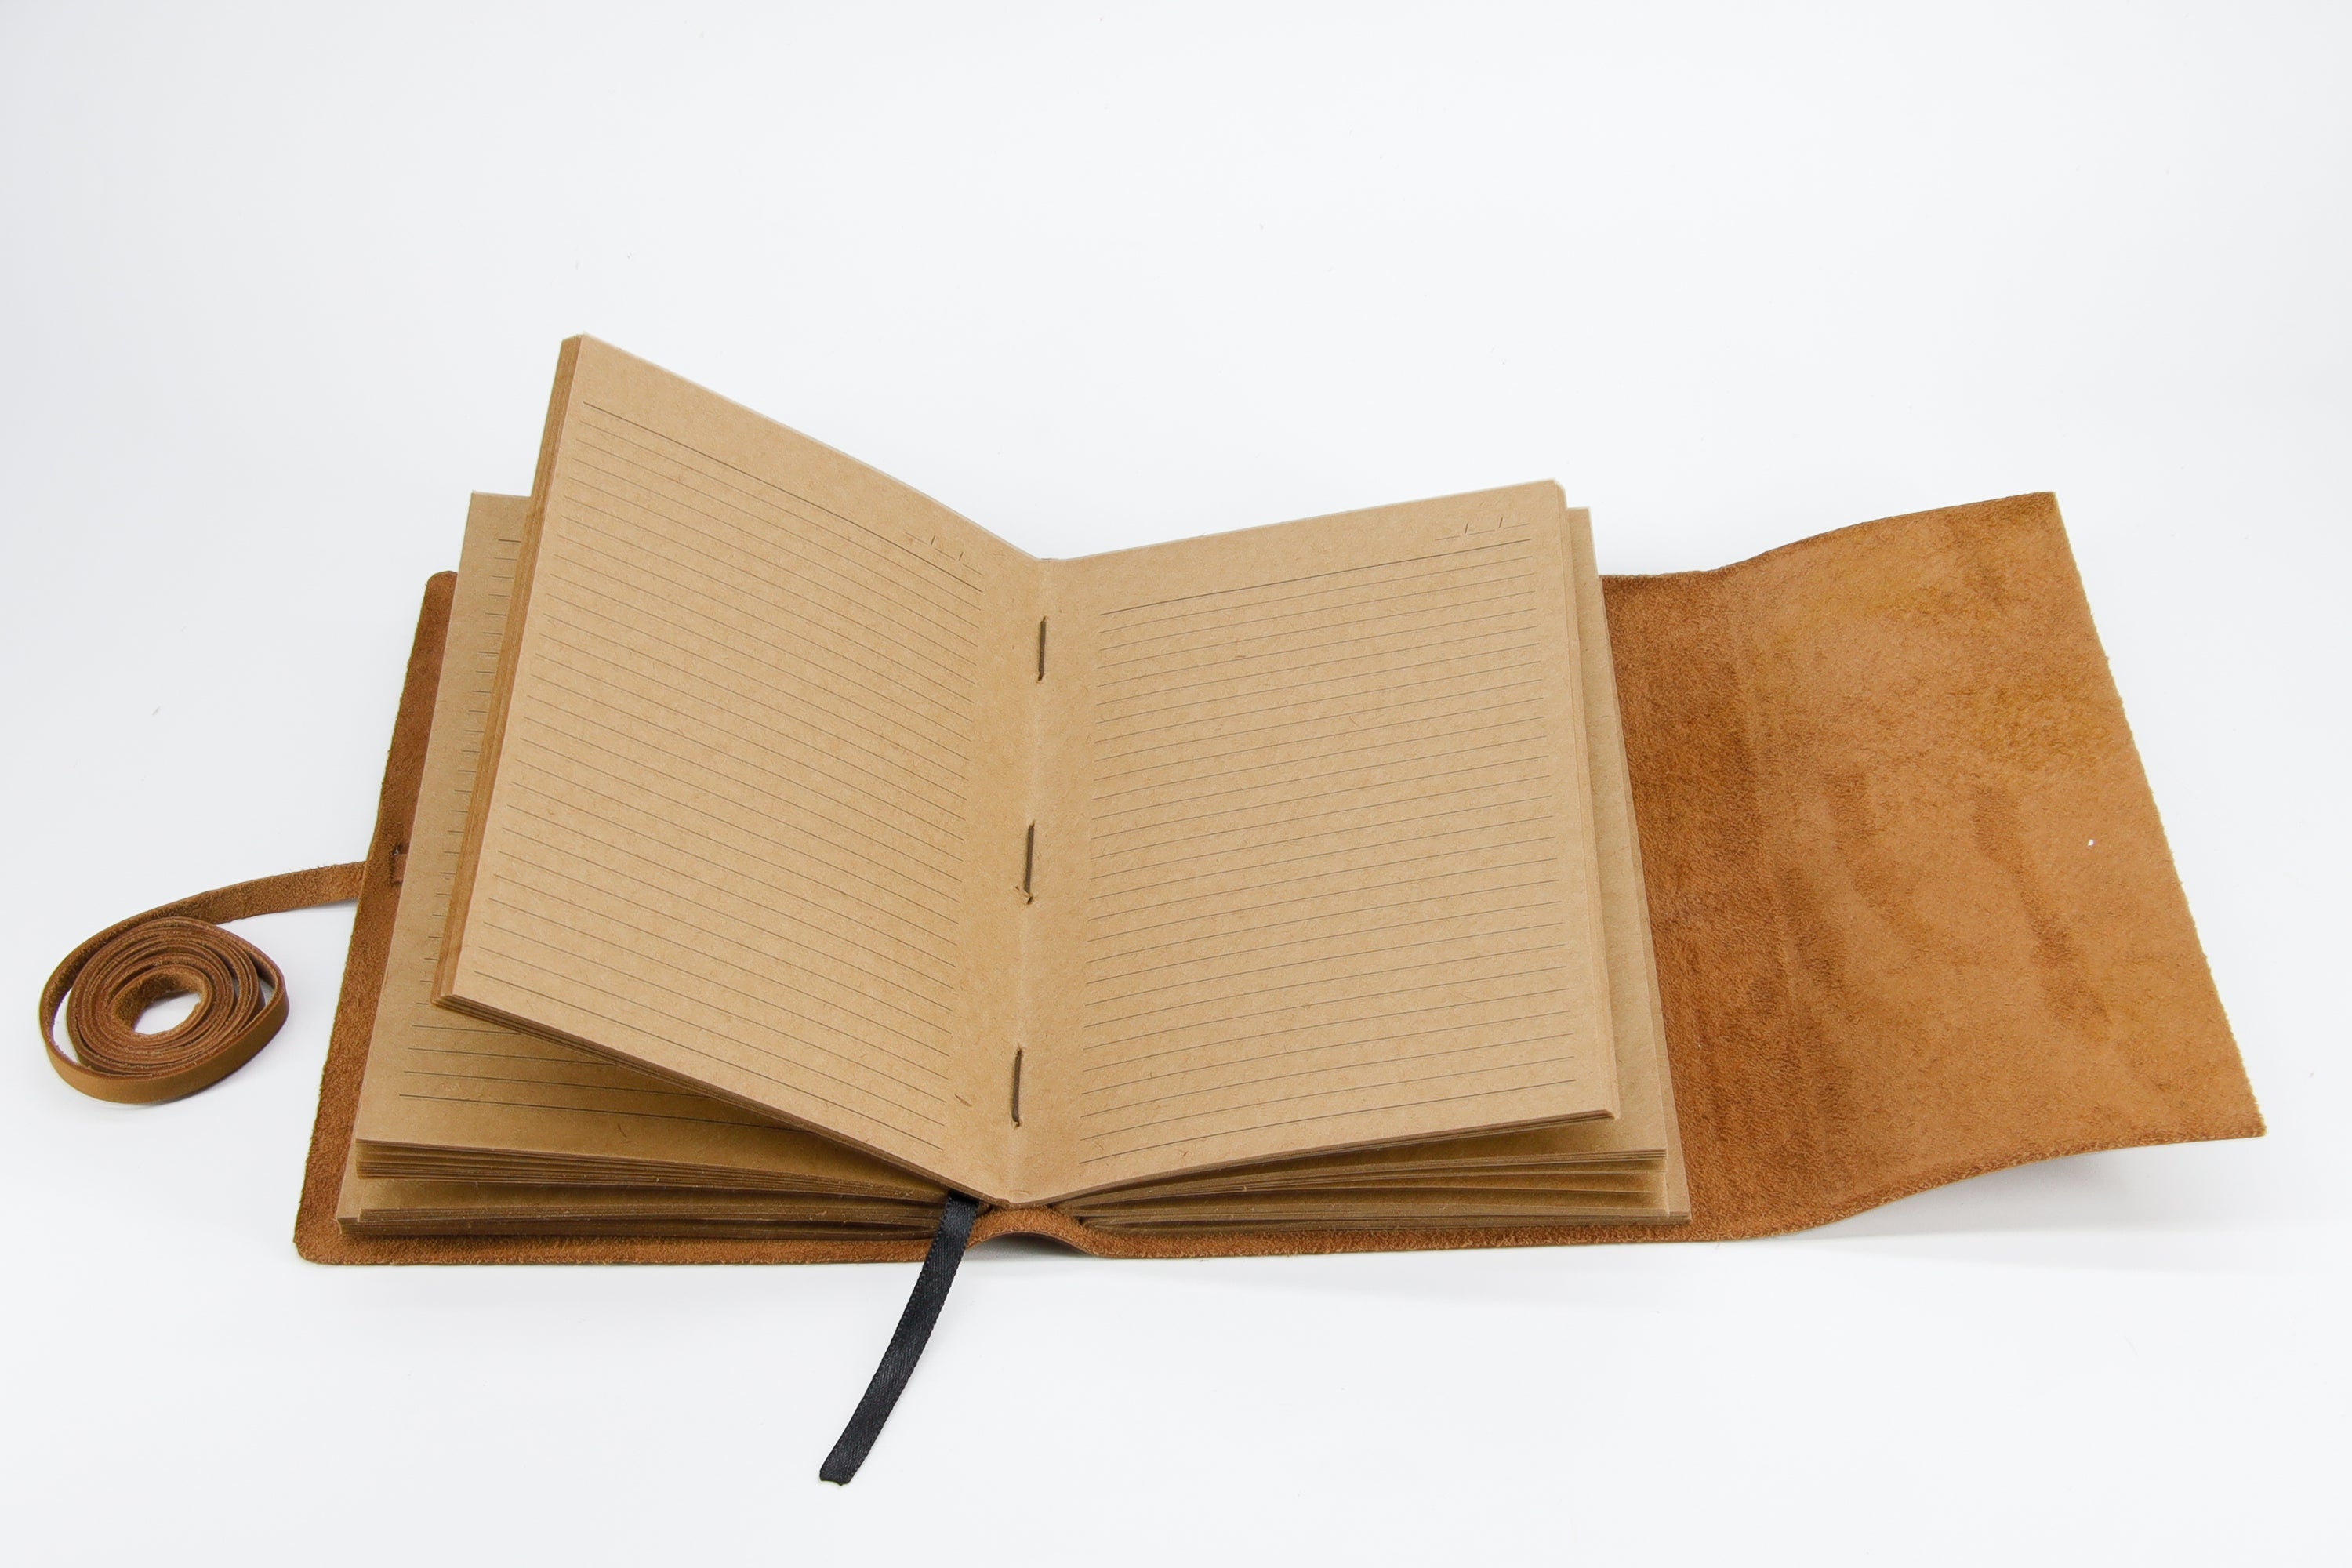 Leather Journal Notebook - Leather Bound Journal For Men, Lined